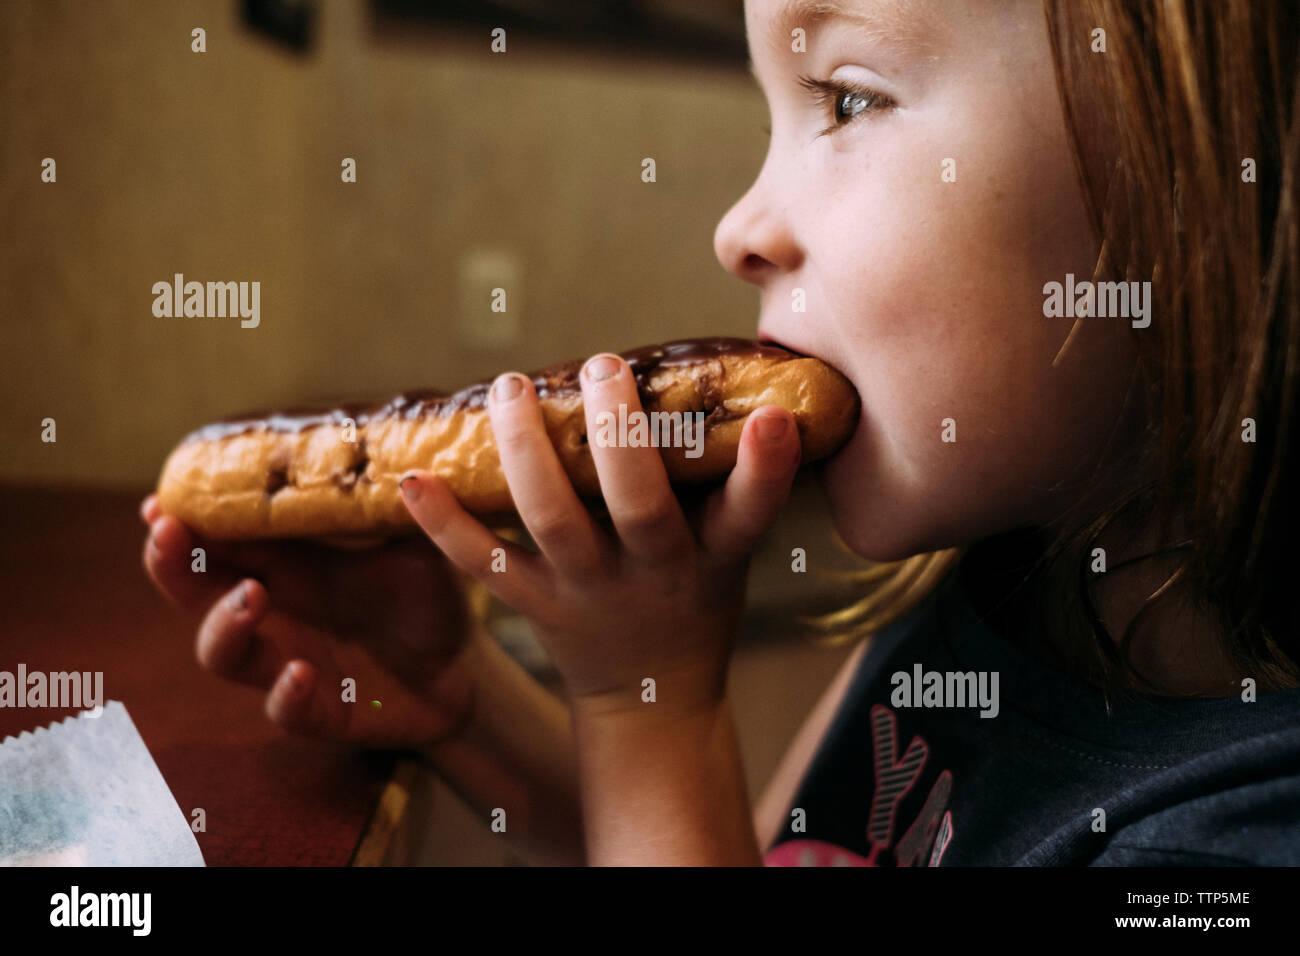 Side view of cute girl eating sweet food while sitting at home Stock Photo